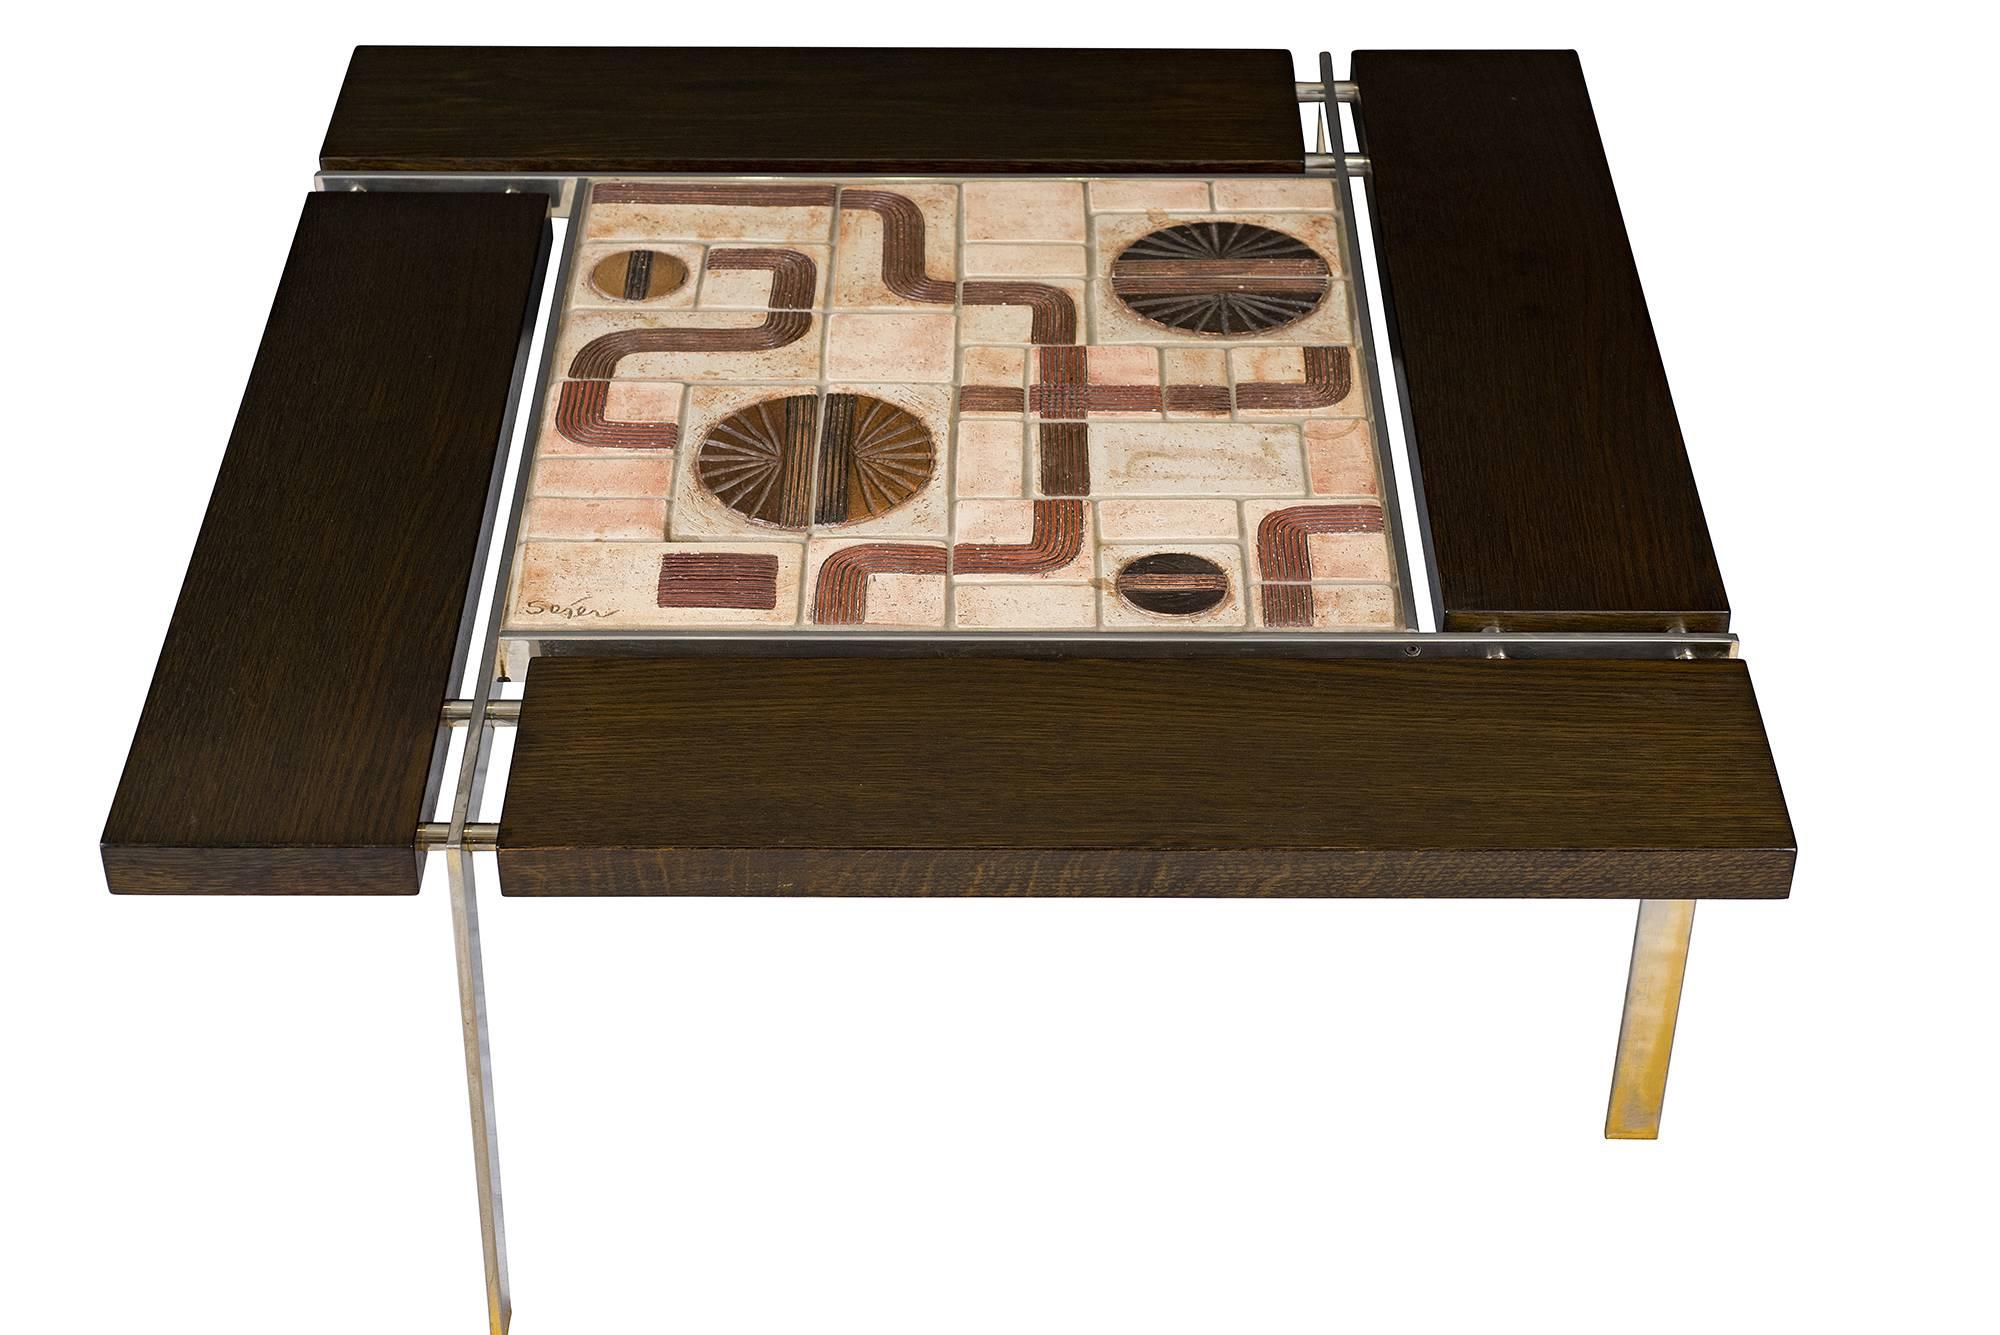 Svend Aage Jessen square coffee table produced by Sejer.